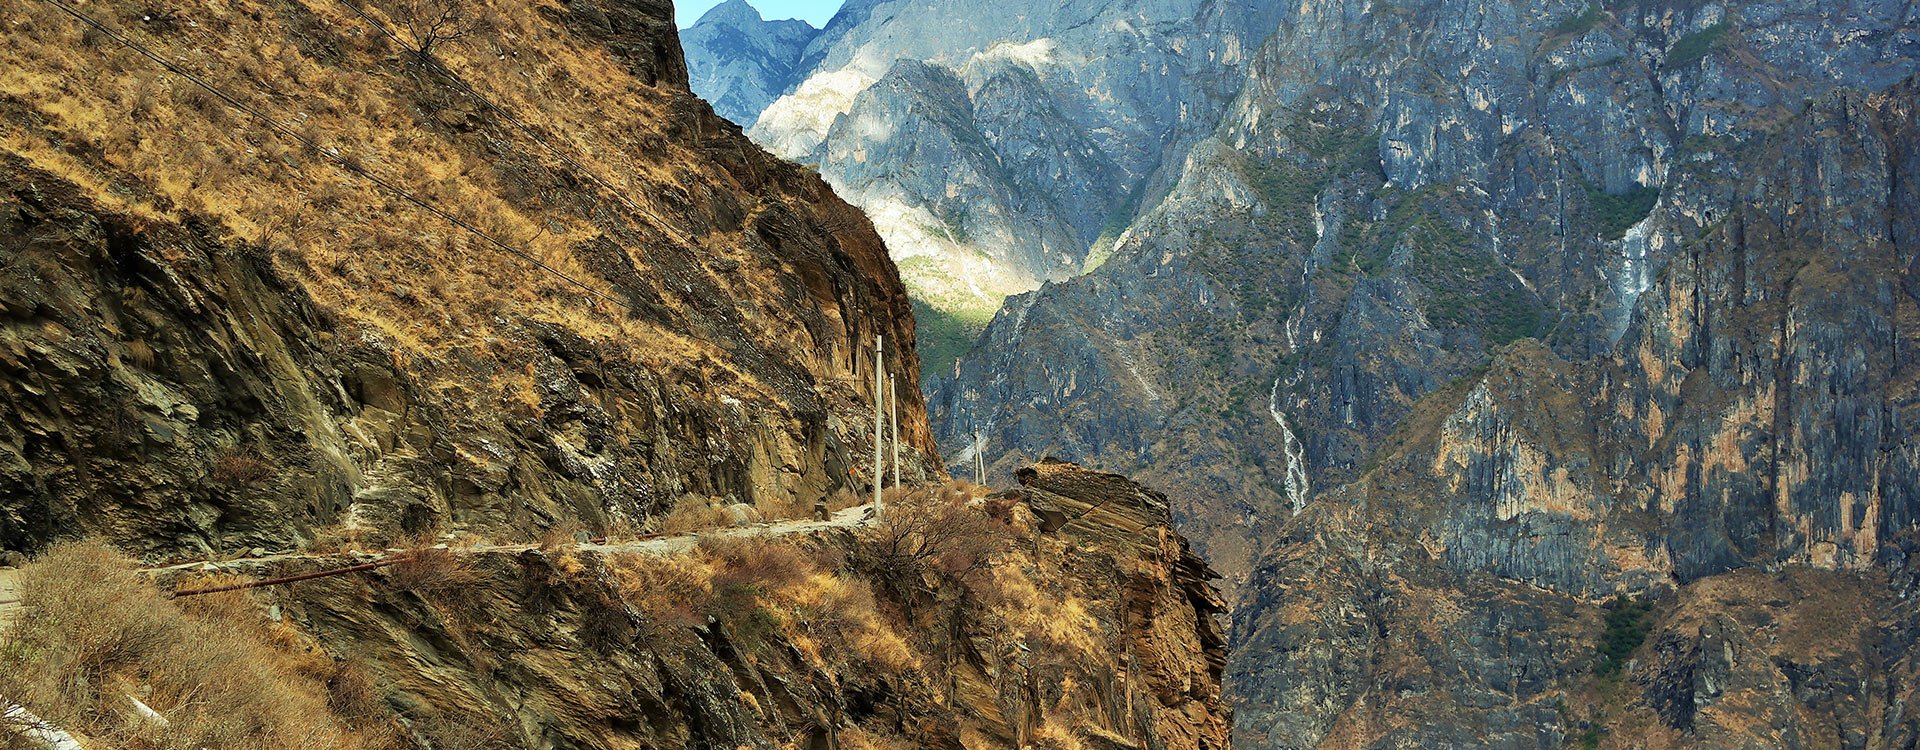 Yunnan_ Tiger Leaping Gorge